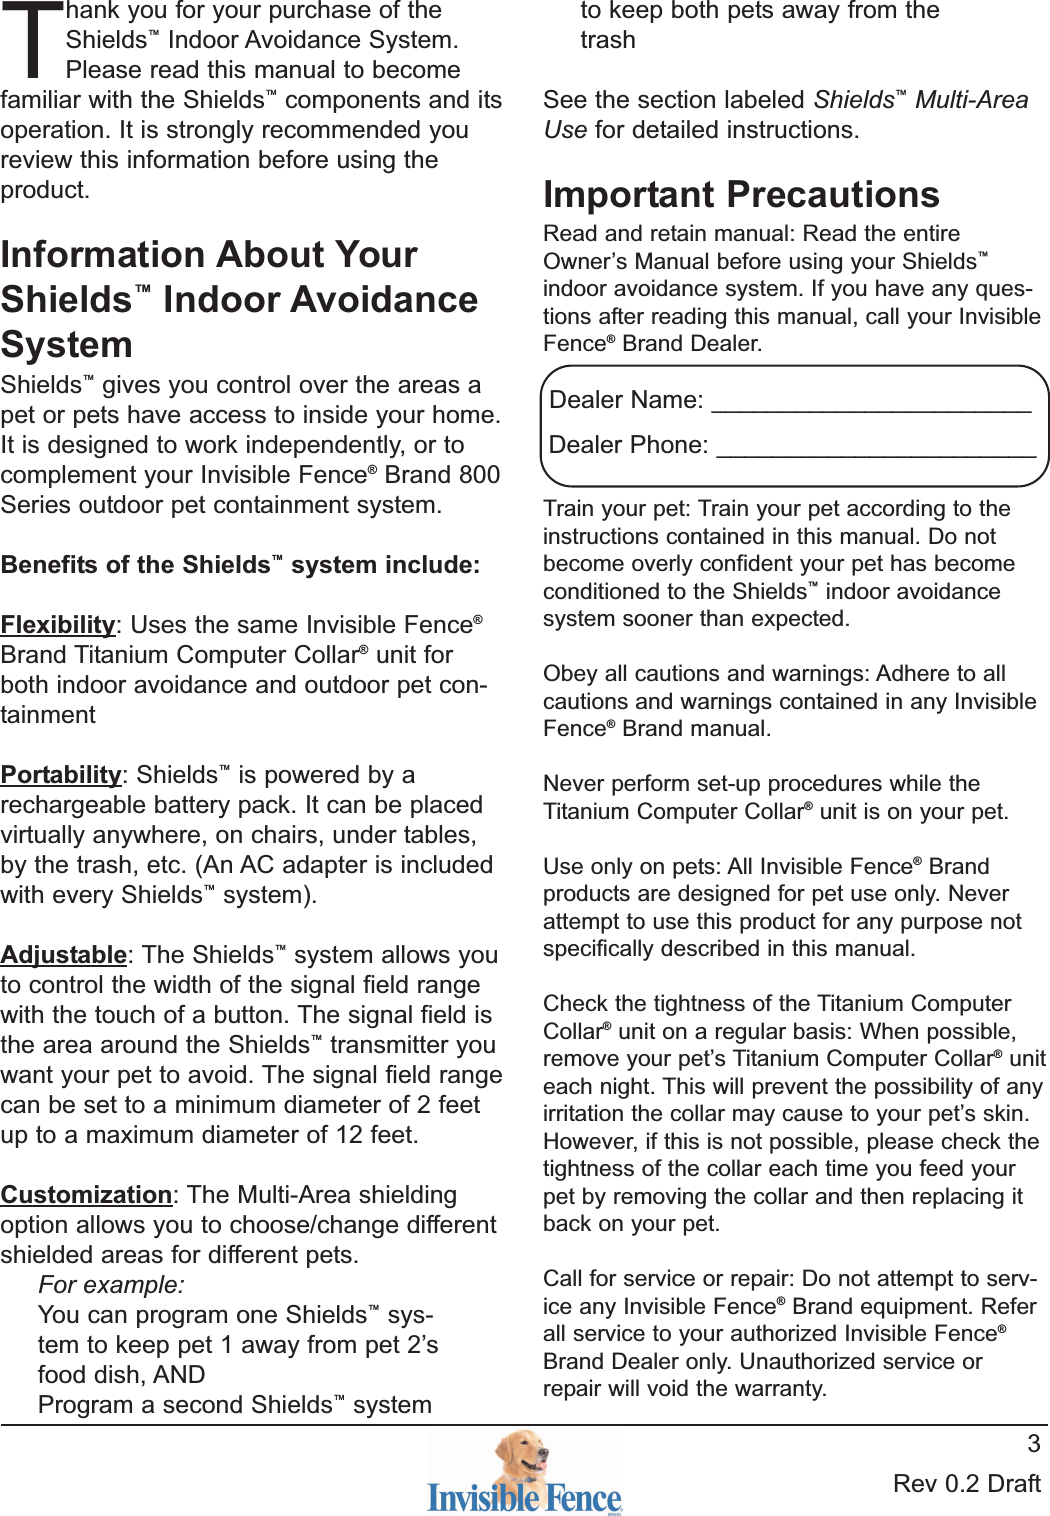 Rev 0.2 Draft3Thank you for your purchase of theShields™Indoor Avoidance System.Please read this manual to becomefamiliar with the Shields™components and itsoperation. It is strongly recommended youreview this information before using theproduct.Information About YourShields™Indoor AvoidanceSystemShields™gives you control over the areas apet or pets have access to inside your home.It is designed to work independently, or tocomplement your Invisible Fence®Brand 800Series outdoor pet containment system.Benefits of the Shields™system include:Flexibility: Uses the same Invisible Fence®Brand Titanium Computer Collar®unit forboth indoor avoidance and outdoor pet con-tainment Portability: Shields™is powered by arechargeable battery pack. It can be placedvirtually anywhere, on chairs, under tables,by the trash, etc. (An AC adapter is includedwith every Shields™system).Adjustable: The Shields™system allows youto control the width of the signal field rangewith the touch of a button. The signal field isthe area around the Shields™transmitter youwant your pet to avoid. The signal field rangecan be set to a minimum diameter of 2 feetup to a maximum diameter of 12 feet.Customization: The Multi-Area shieldingoption allows you to choose/change differentshielded areas for different pets.For example:You can program one Shields™sys-tem to keep pet 1 away from pet 2’sfood dish, ANDProgram a second Shields™systemto keep both pets away from thetrashSee the section labeled Shields™Multi-AreaUse for detailed instructions.Important PrecautionsRead and retain manual: Read the entireOwner’s Manual before using your Shields™indoor avoidance system. If you have any ques-tions after reading this manual, call your InvisibleFence®Brand Dealer.Train your pet: Train your pet according to theinstructions contained in this manual. Do notbecome overly confident your pet has becomeconditioned to the Shields™indoor avoidancesystem sooner than expected.Obey all cautions and warnings: Adhere to allcautions and warnings contained in any InvisibleFence®Brand manual.Never perform set-up procedures while theTitanium Computer Collar®unit is on your pet.Use only on pets: All Invisible Fence®Brandproducts are designed for pet use only. Neverattempt to use this product for any purpose notspecifically described in this manual.Check the tightness of the Titanium ComputerCollar®unit on a regular basis: When possible,remove your pet’s Titanium Computer Collar®uniteach night. This will prevent the possibility of anyirritation the collar may cause to your pet’s skin.However, if this is not possible, please check thetightness of the collar each time you feed yourpet by removing the collar and then replacing itback on your pet.Call for service or repair: Do not attempt to serv-ice any Invisible Fence®Brand equipment. Referall service to your authorized Invisible Fence®Brand Dealer only. Unauthorized service orrepair will void the warranty.Dealer Name: _______________________Dealer Phone: _______________________